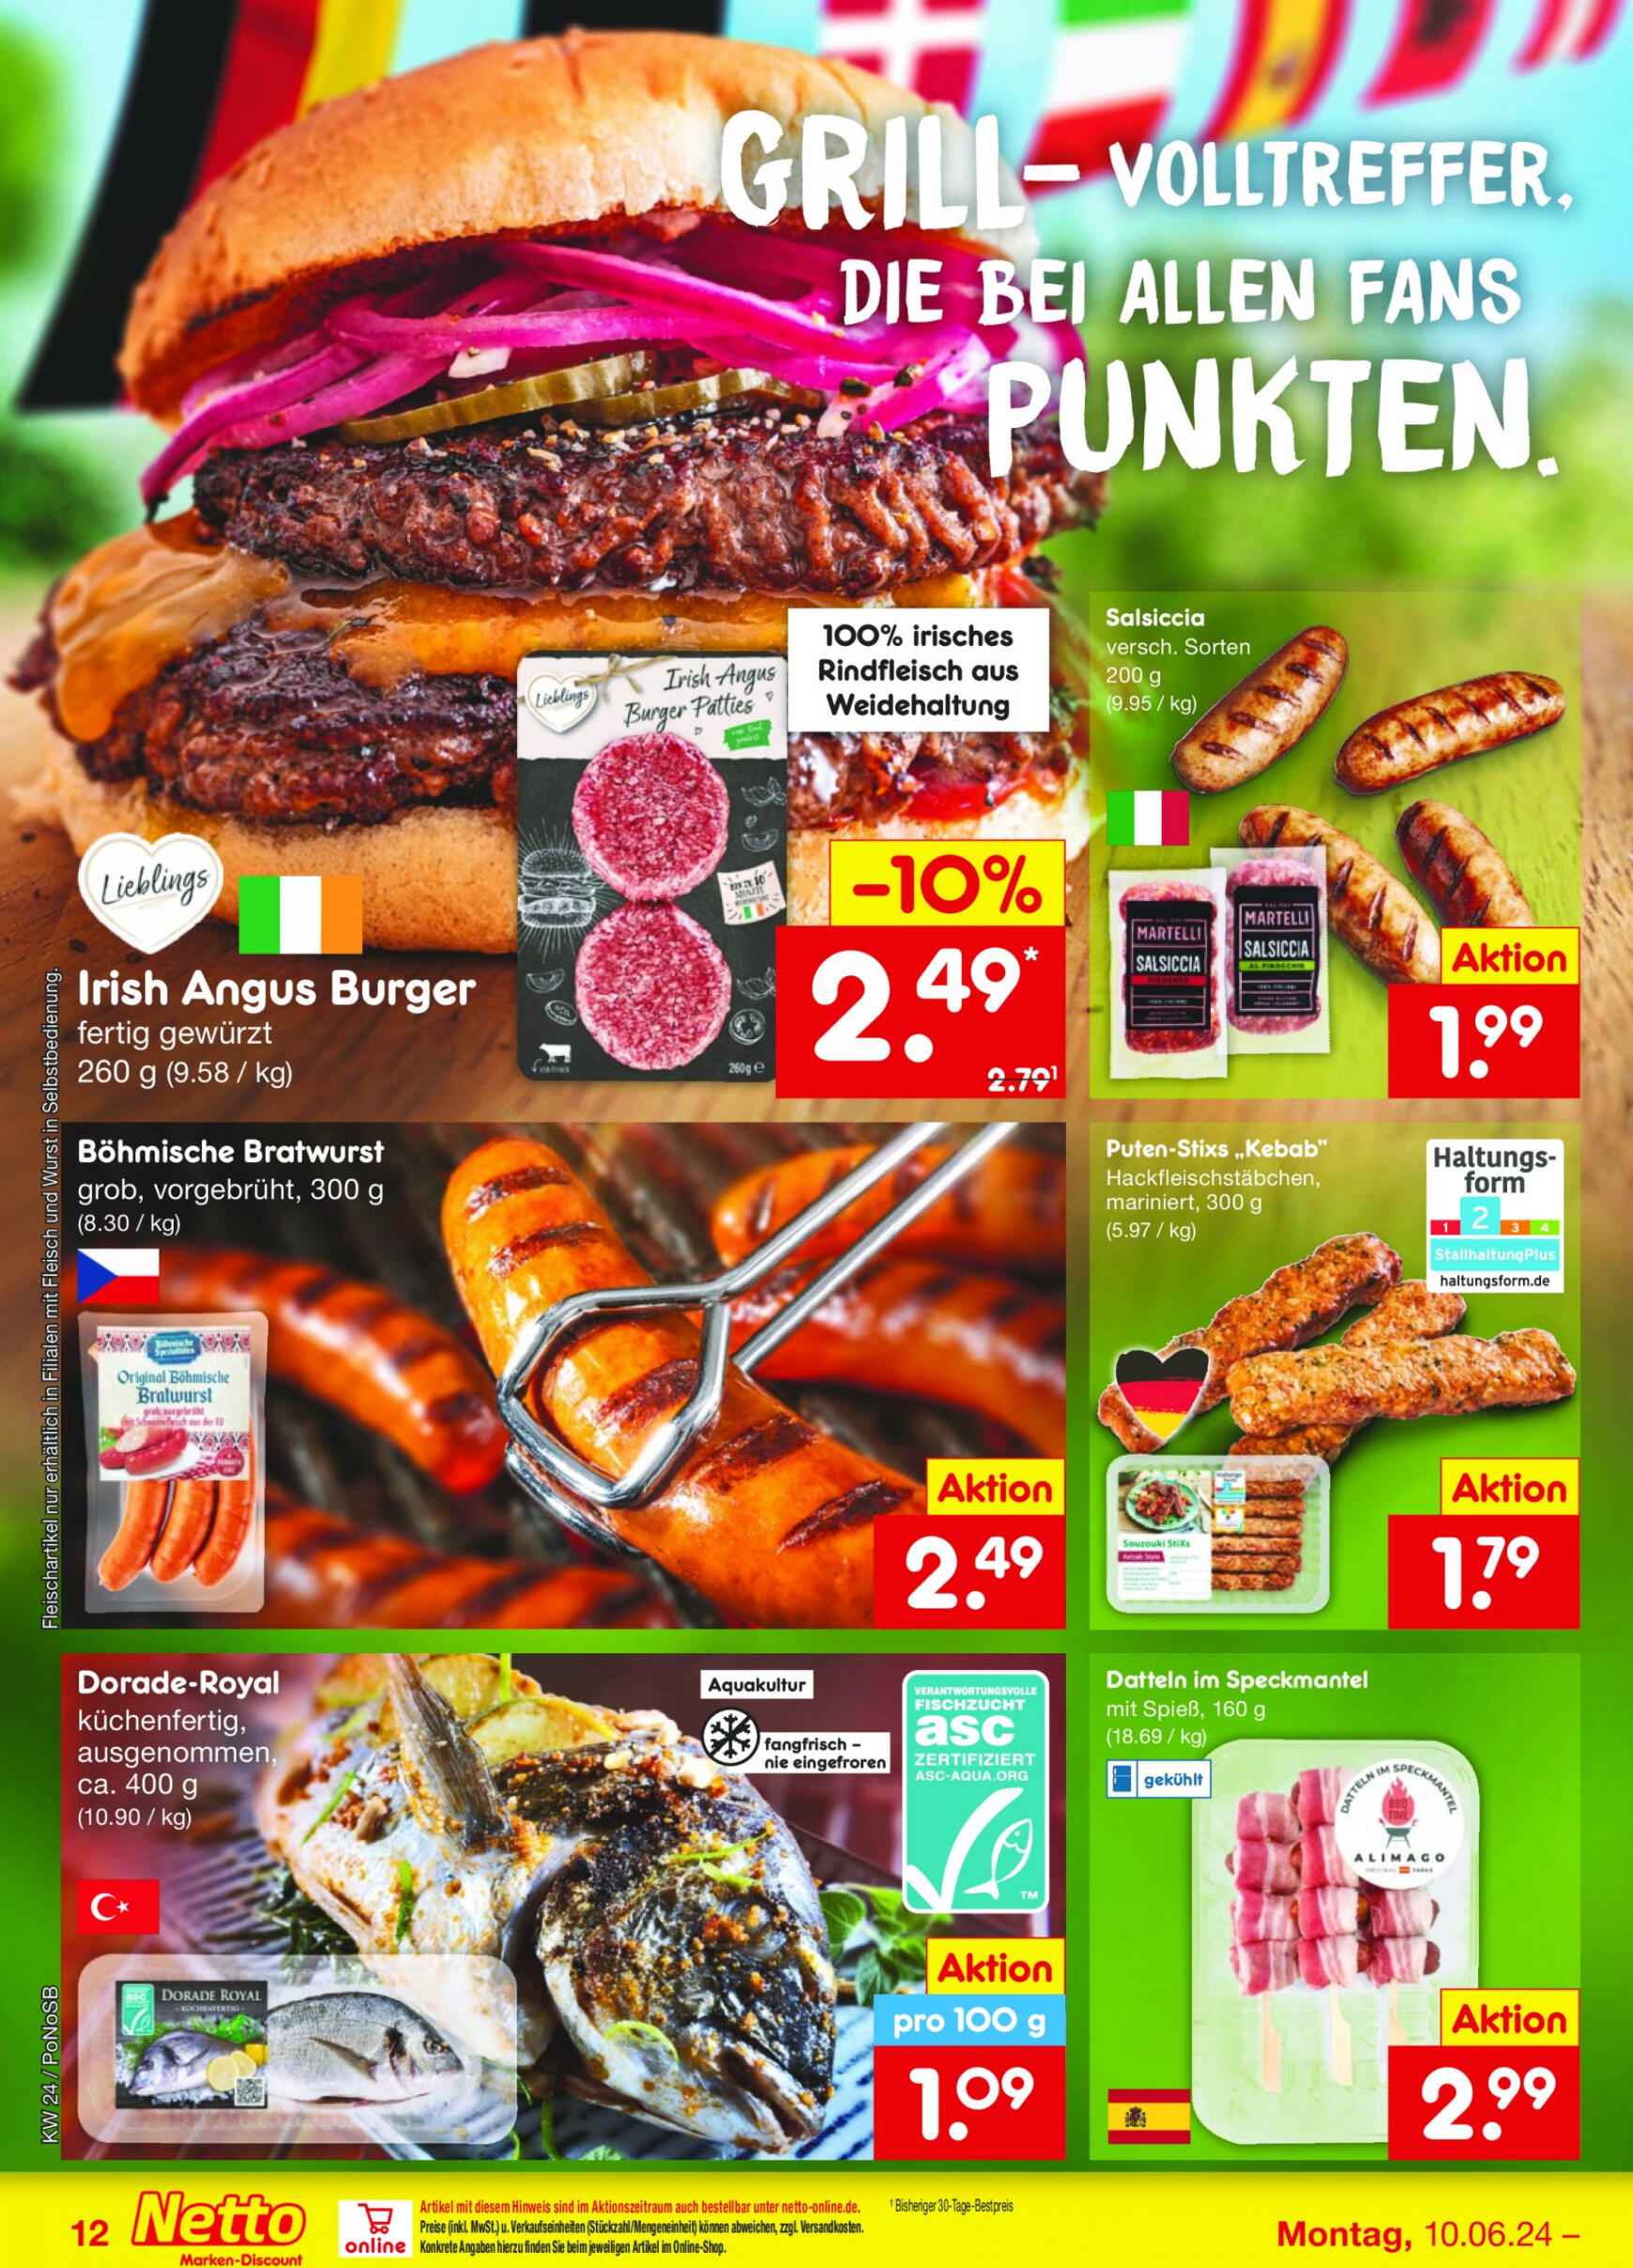 netto - Flyer Netto aktuell 10.06. - 15.06. - page: 14